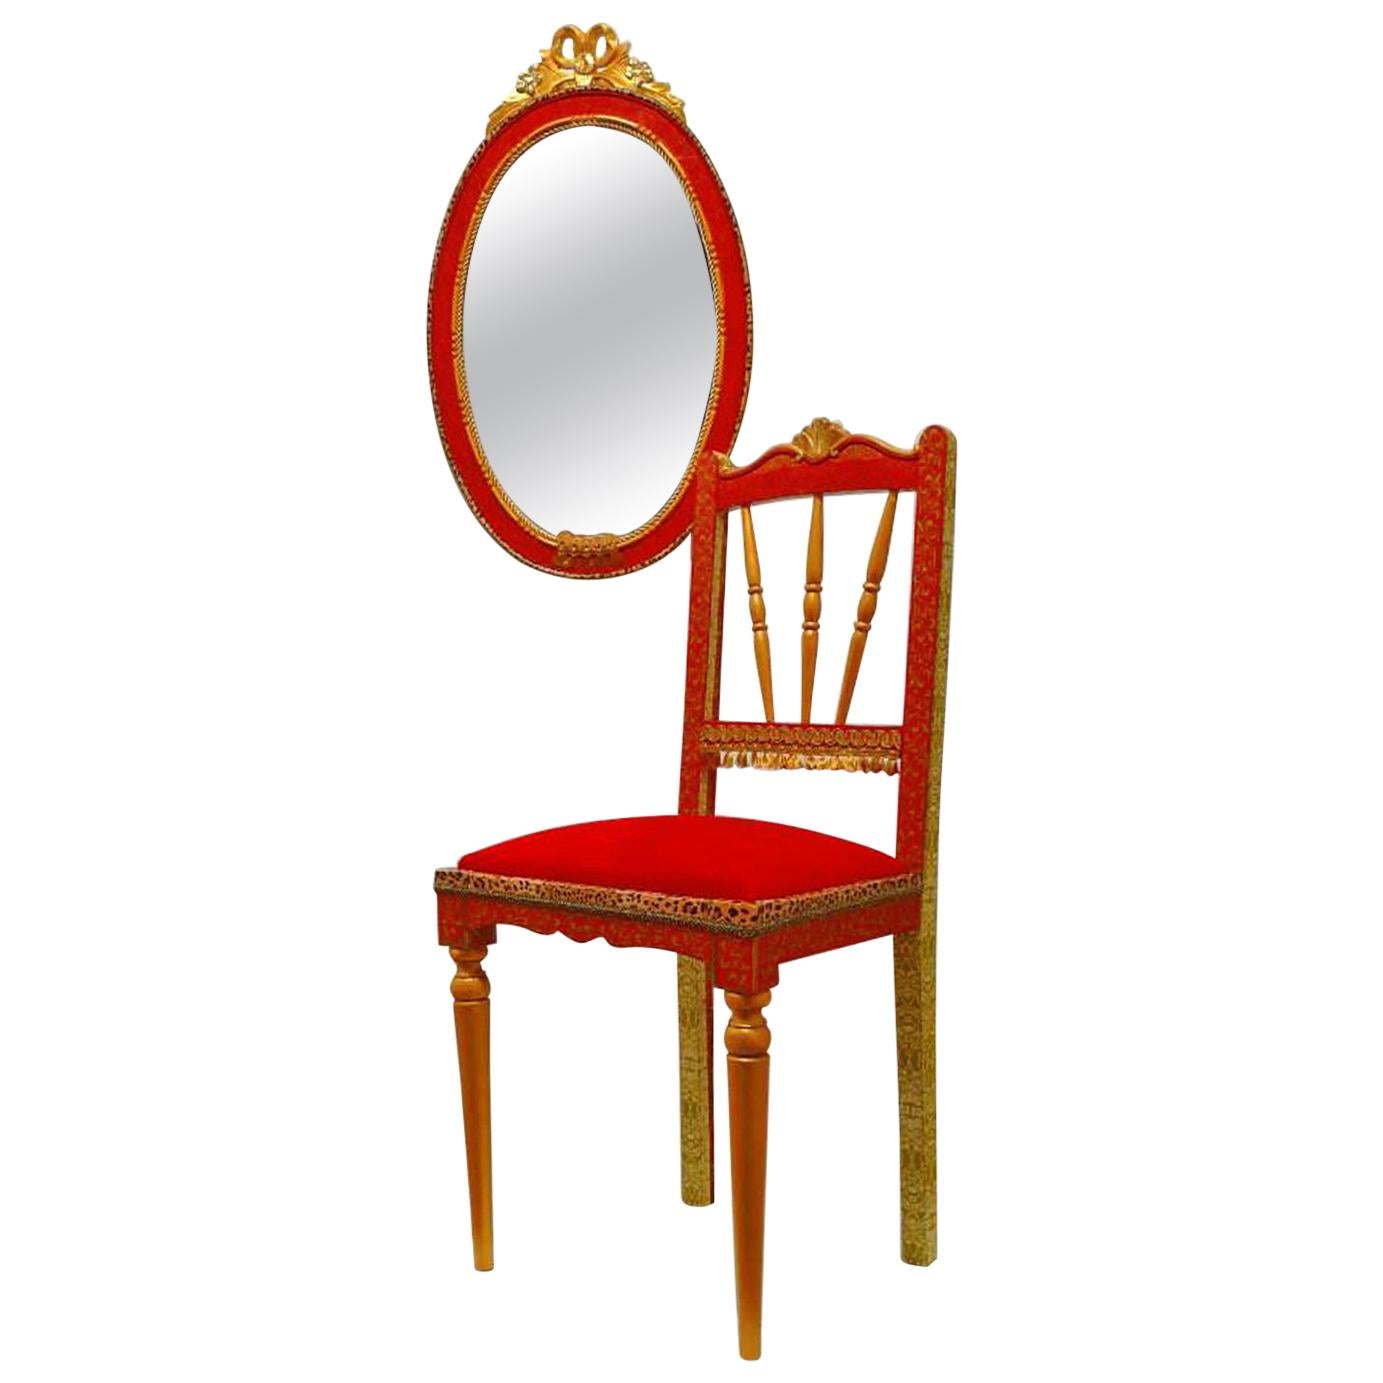 African Queen"Rainha Ginga" Eclectic Set Mirror & Chair Gilt Red & Leopard Paper For Sale